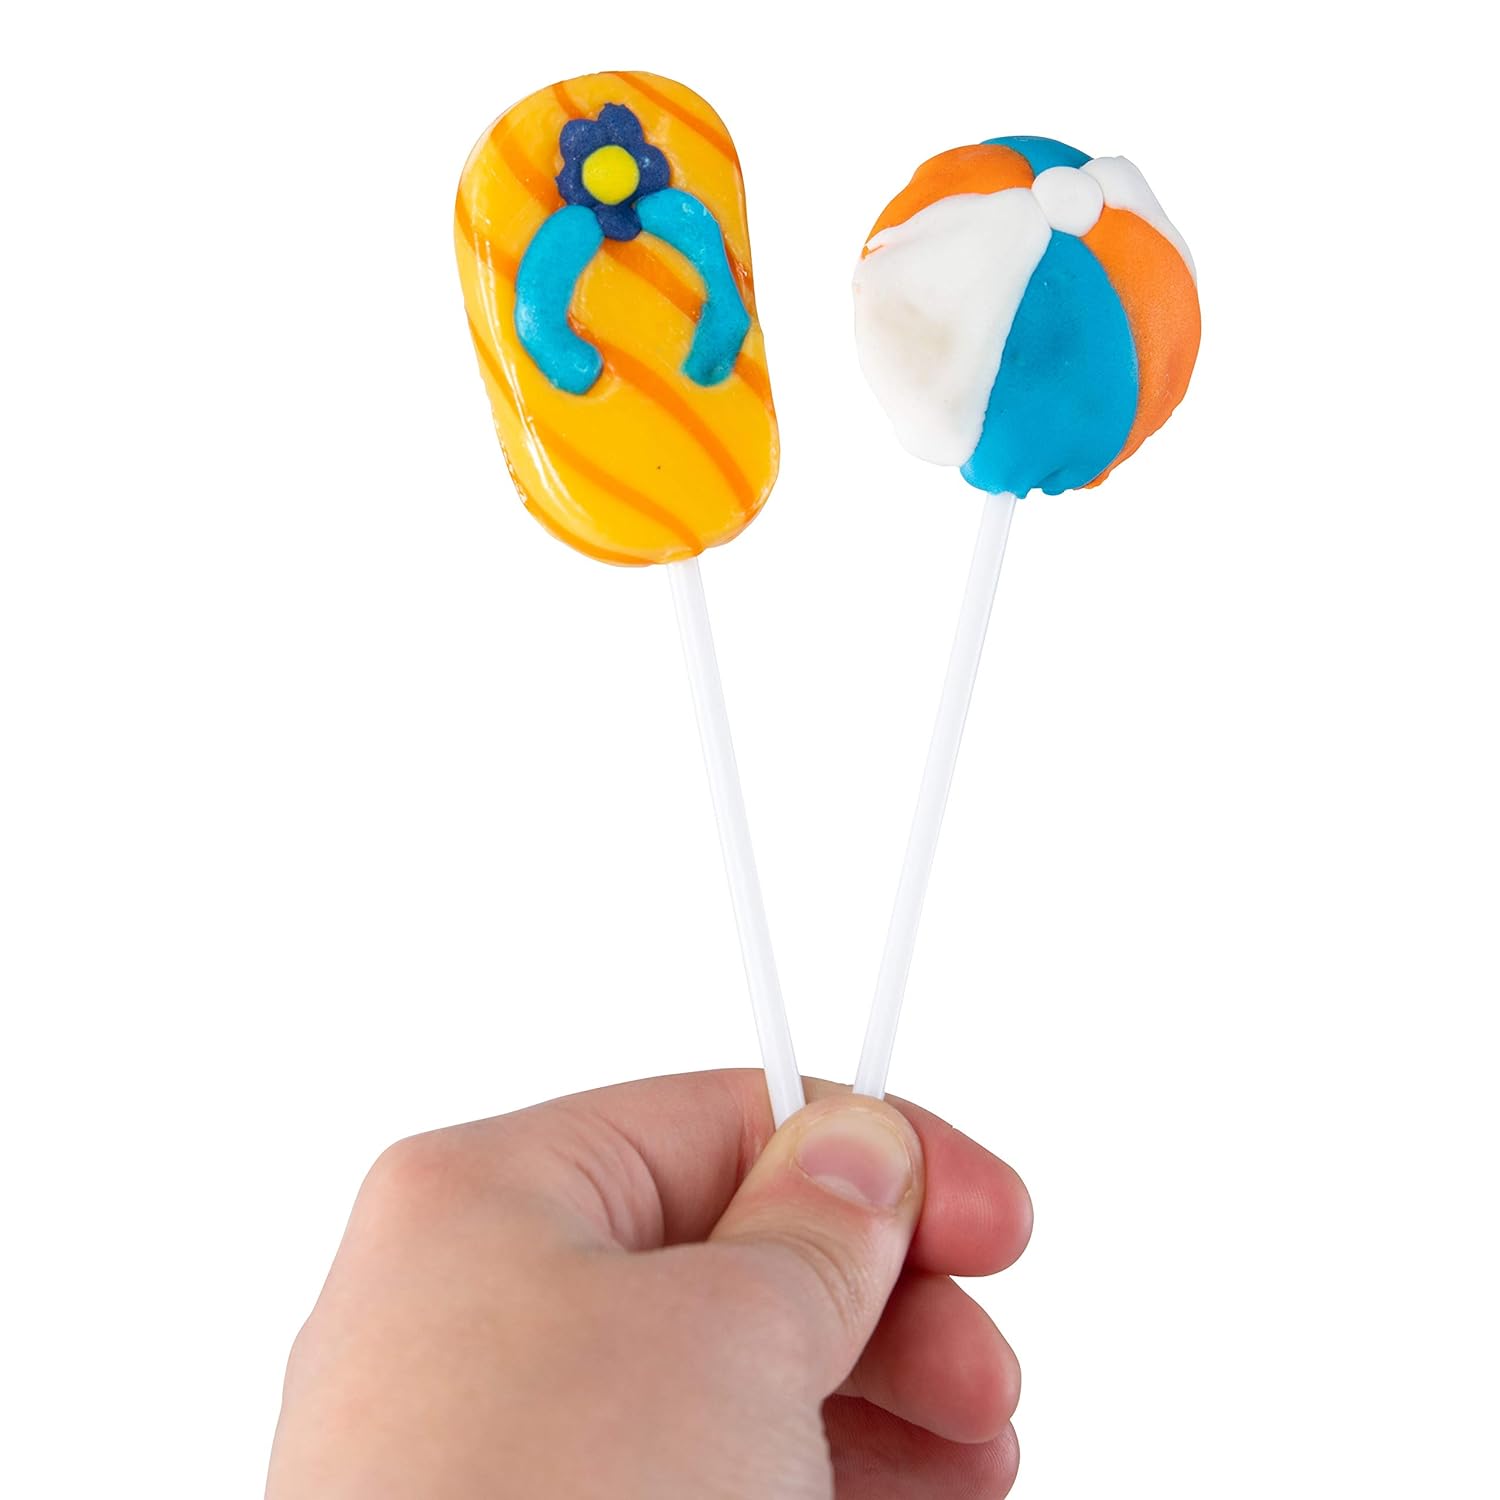  Prextex Beach Themed Lollipops Beach Accessories Shaped Suckers Pack of 12 Pops for Beach and Poolside Birthday Party Favor or Parties Decoration